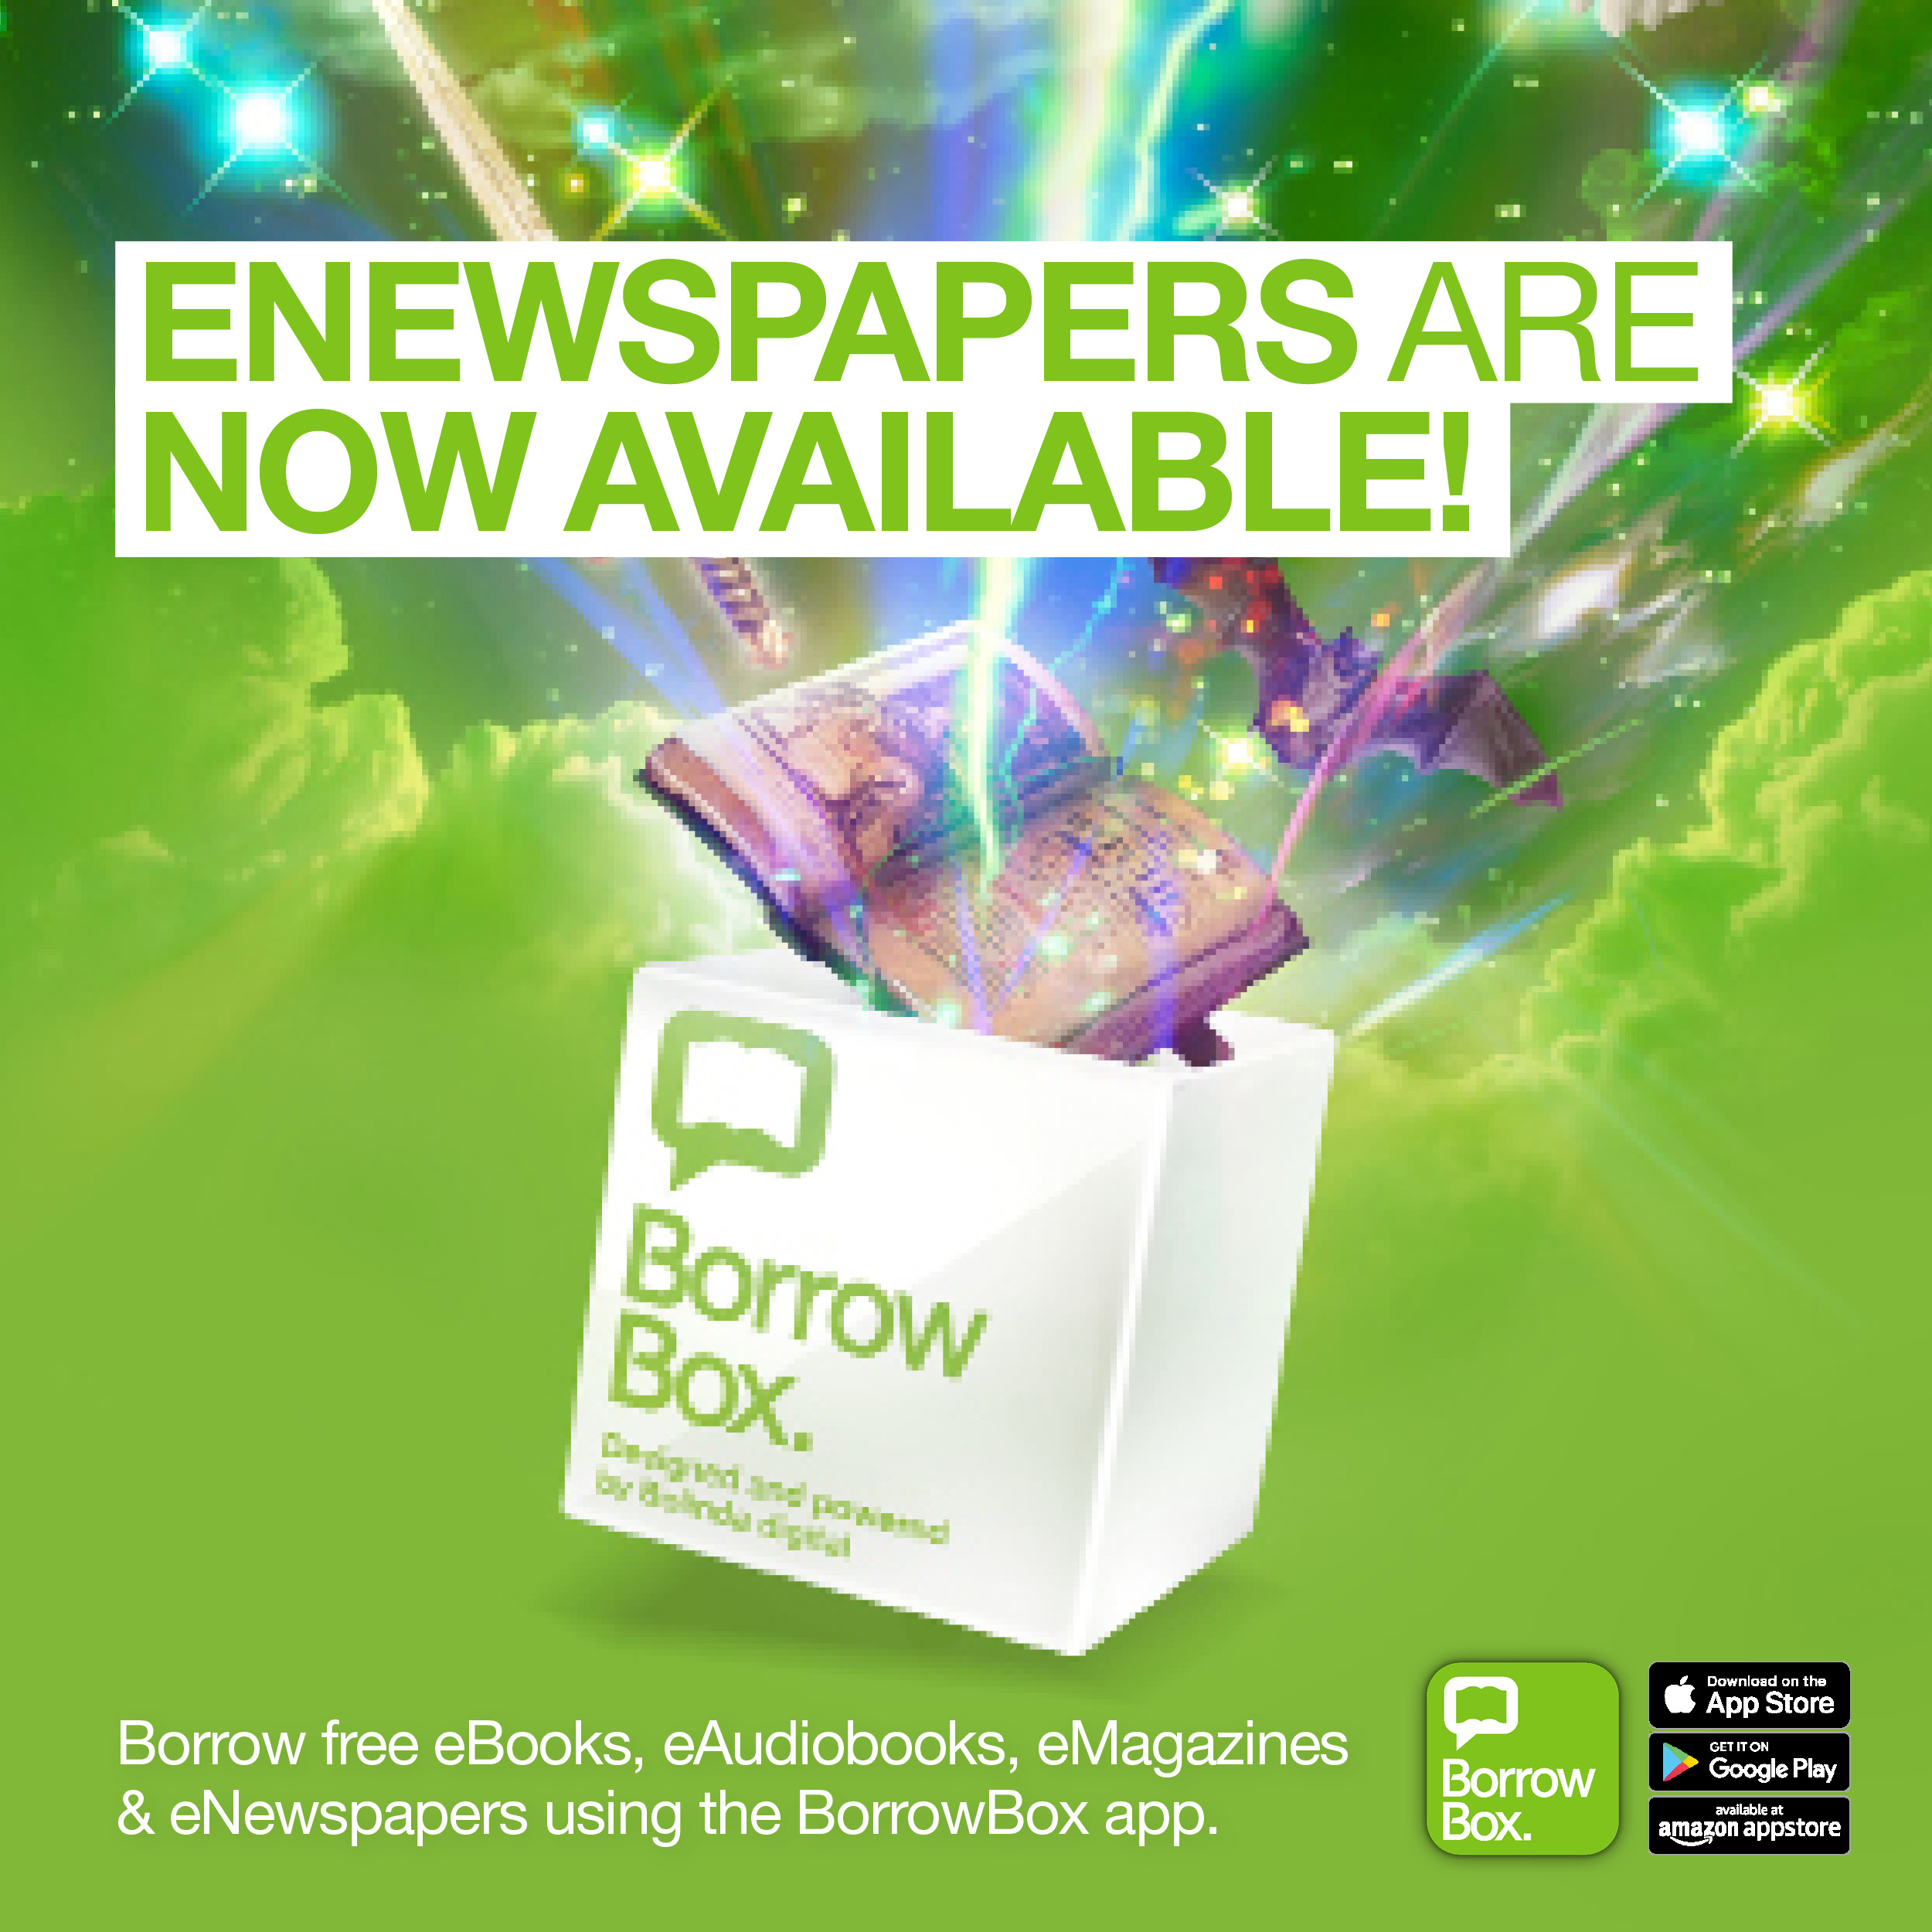 BorrowBox now has newspapers and magazines as well as eBooks and audiobooks.